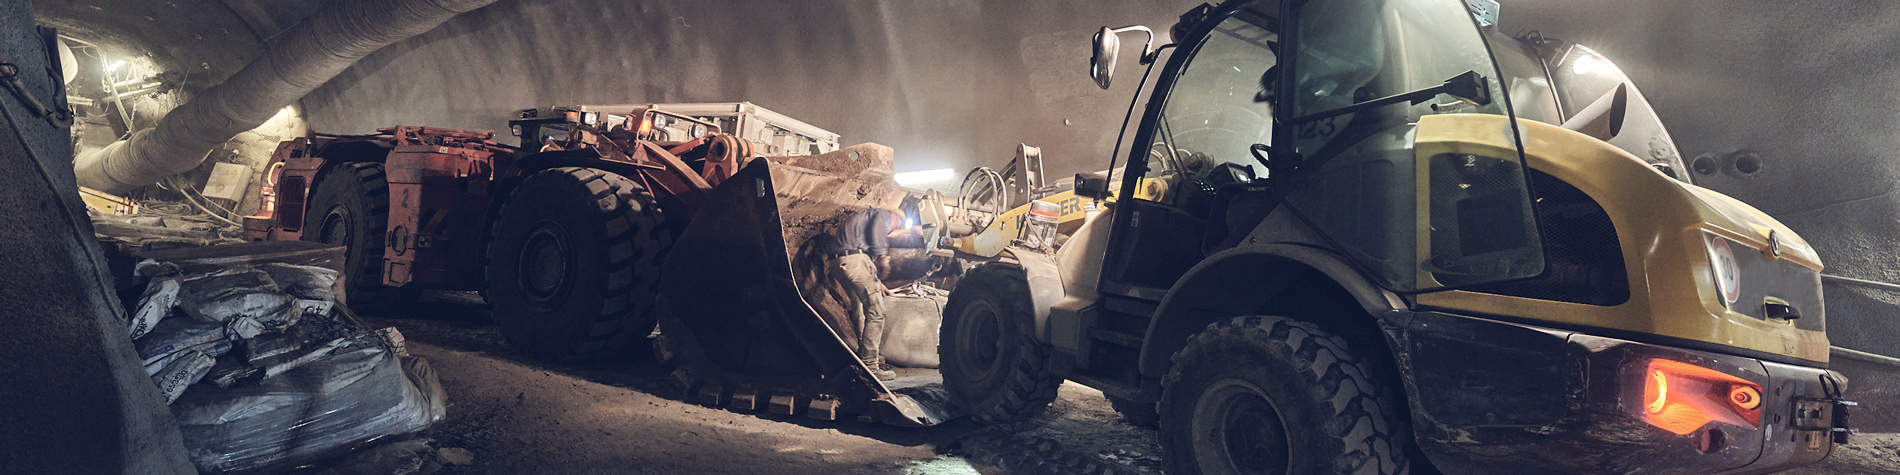 Two wheel loaders load construction material underground in the Konrad mine